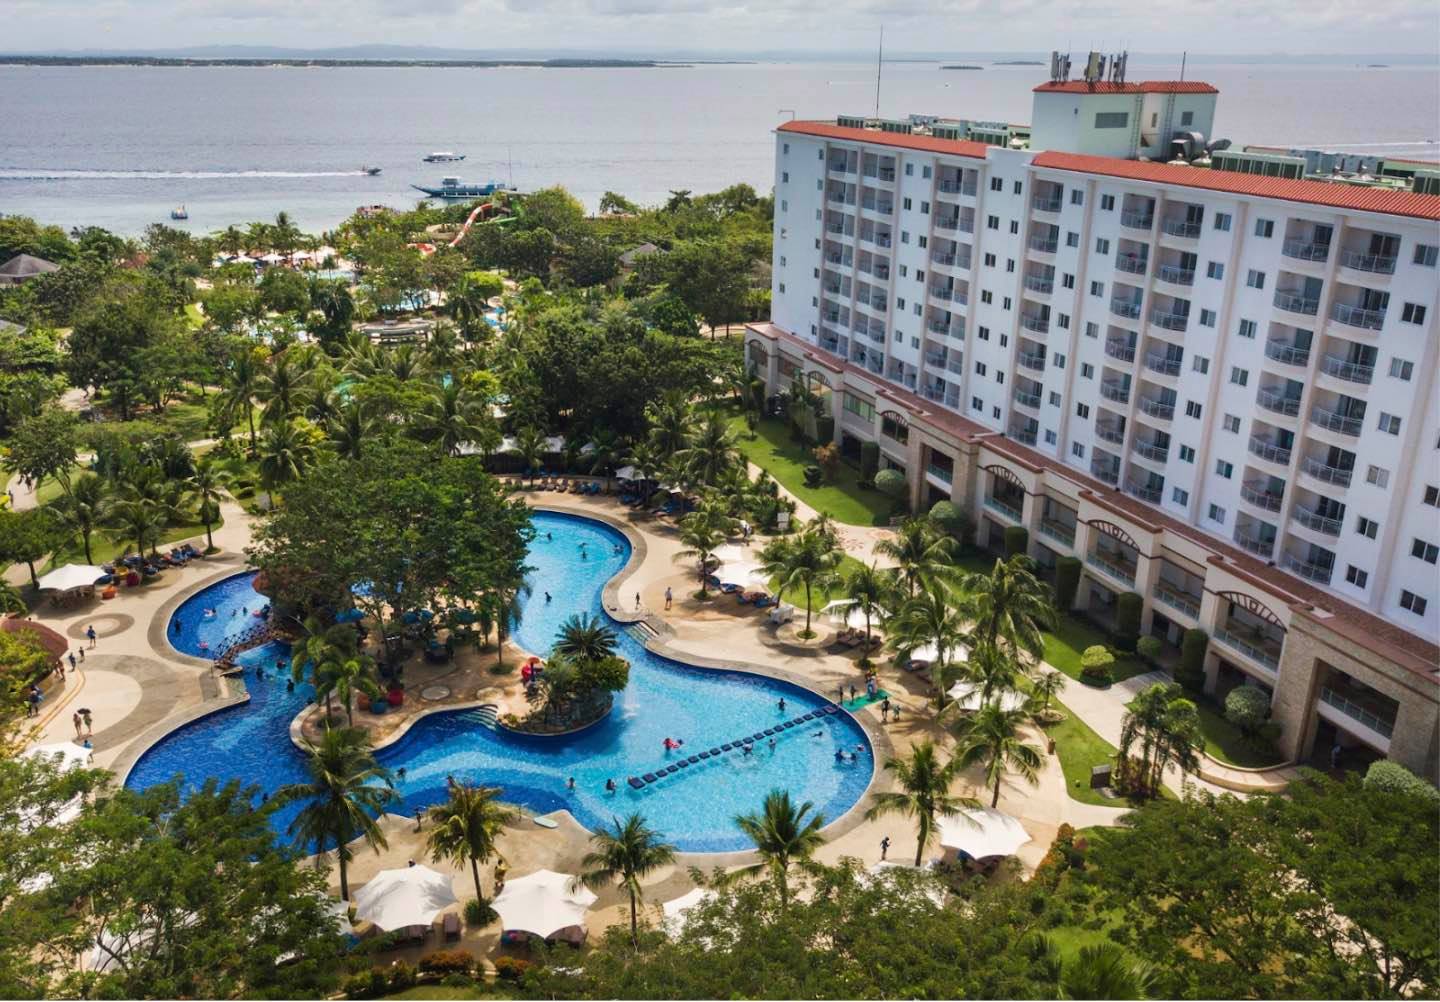 Aerial view of the Jpark Island Resort pool and outdoor area